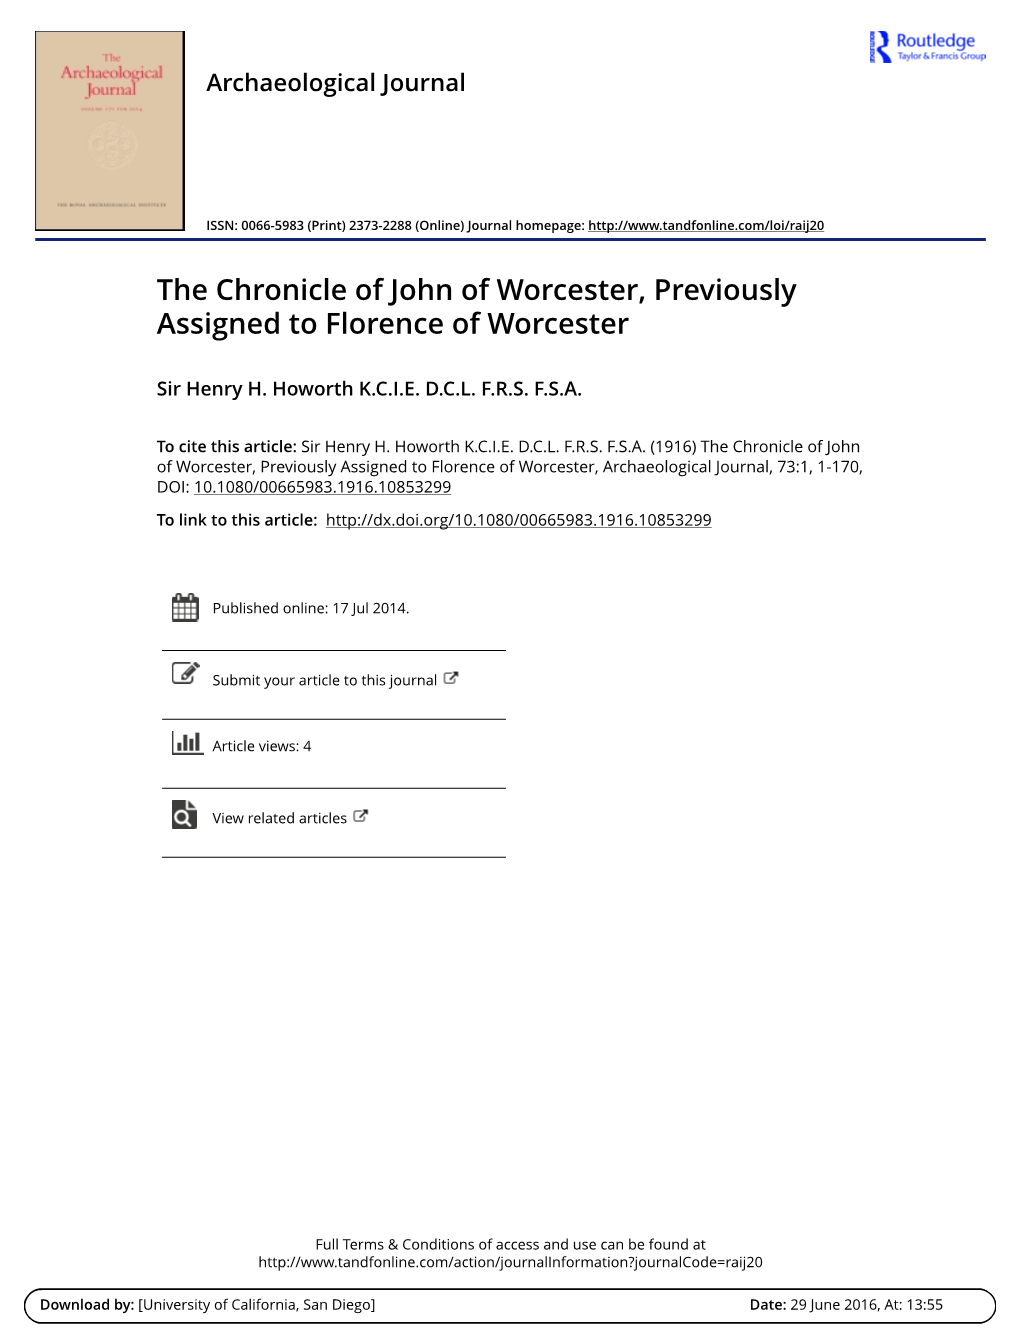 The Chronicle of John of Worcester, Previously Assigned to Florence of Worcester